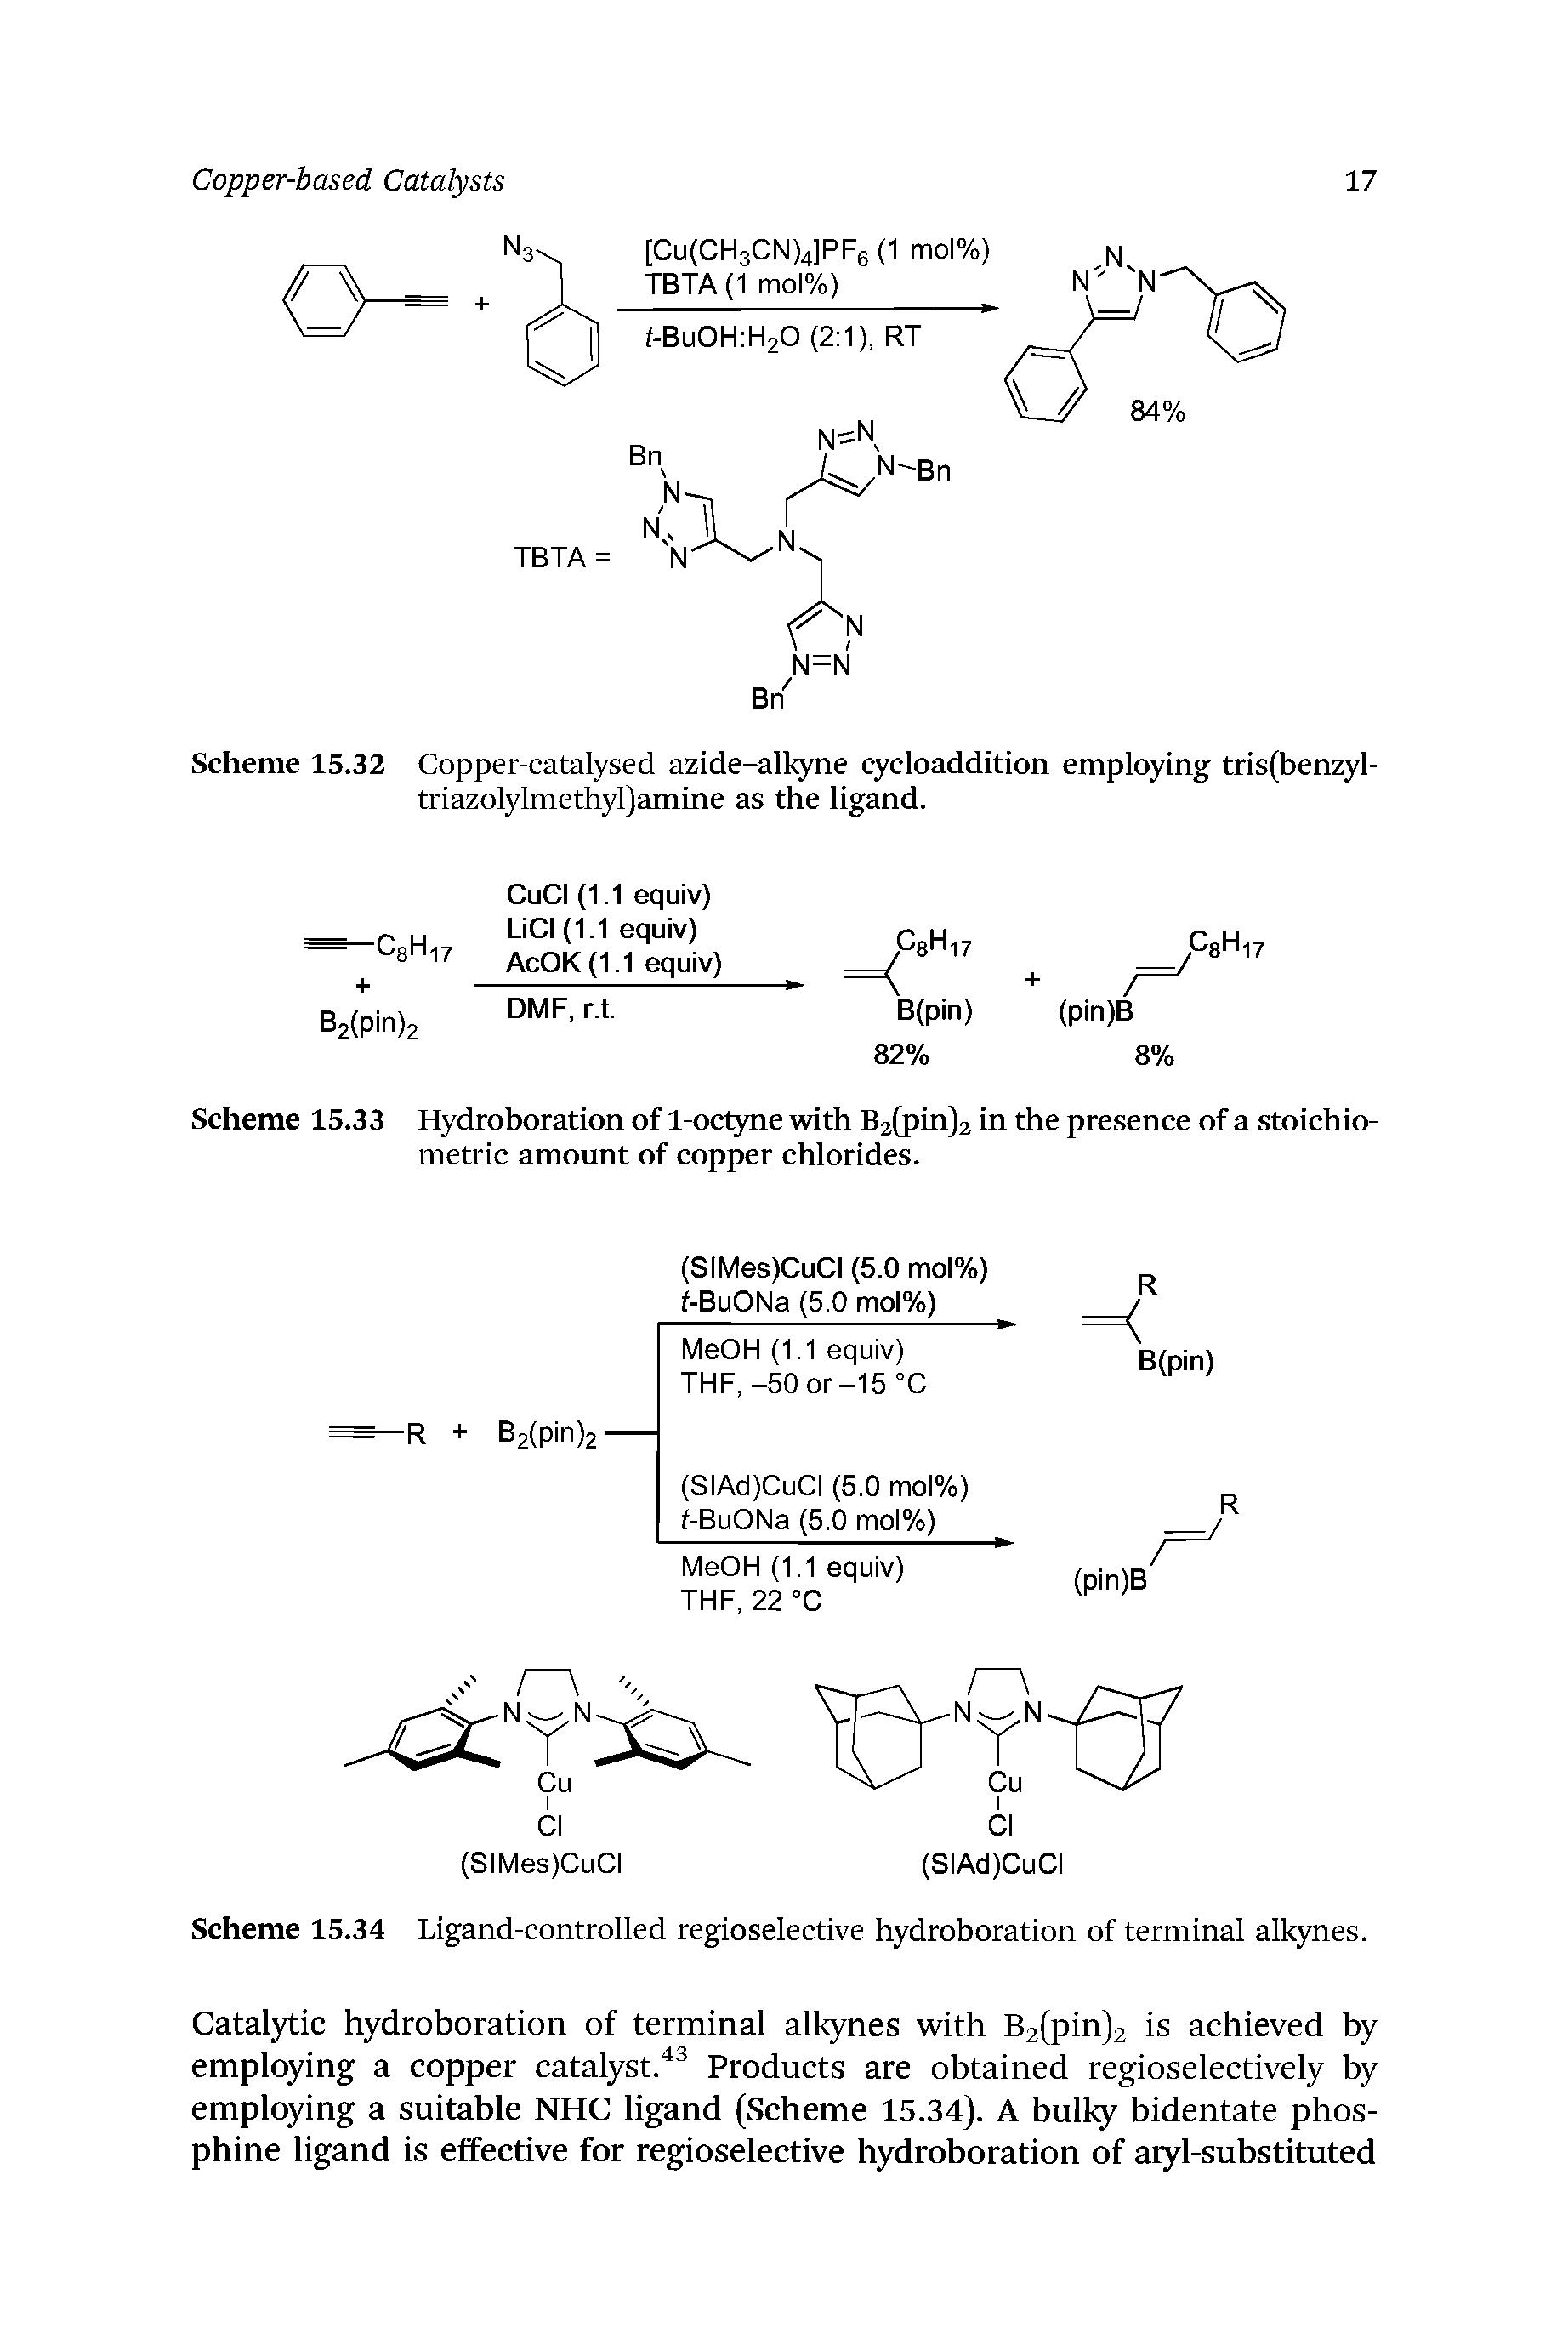 Scheme 15.33 Hydroboration of 1-octyne with B2(pin)2 in the presence of a stoichiometric amount of copper chlorides.